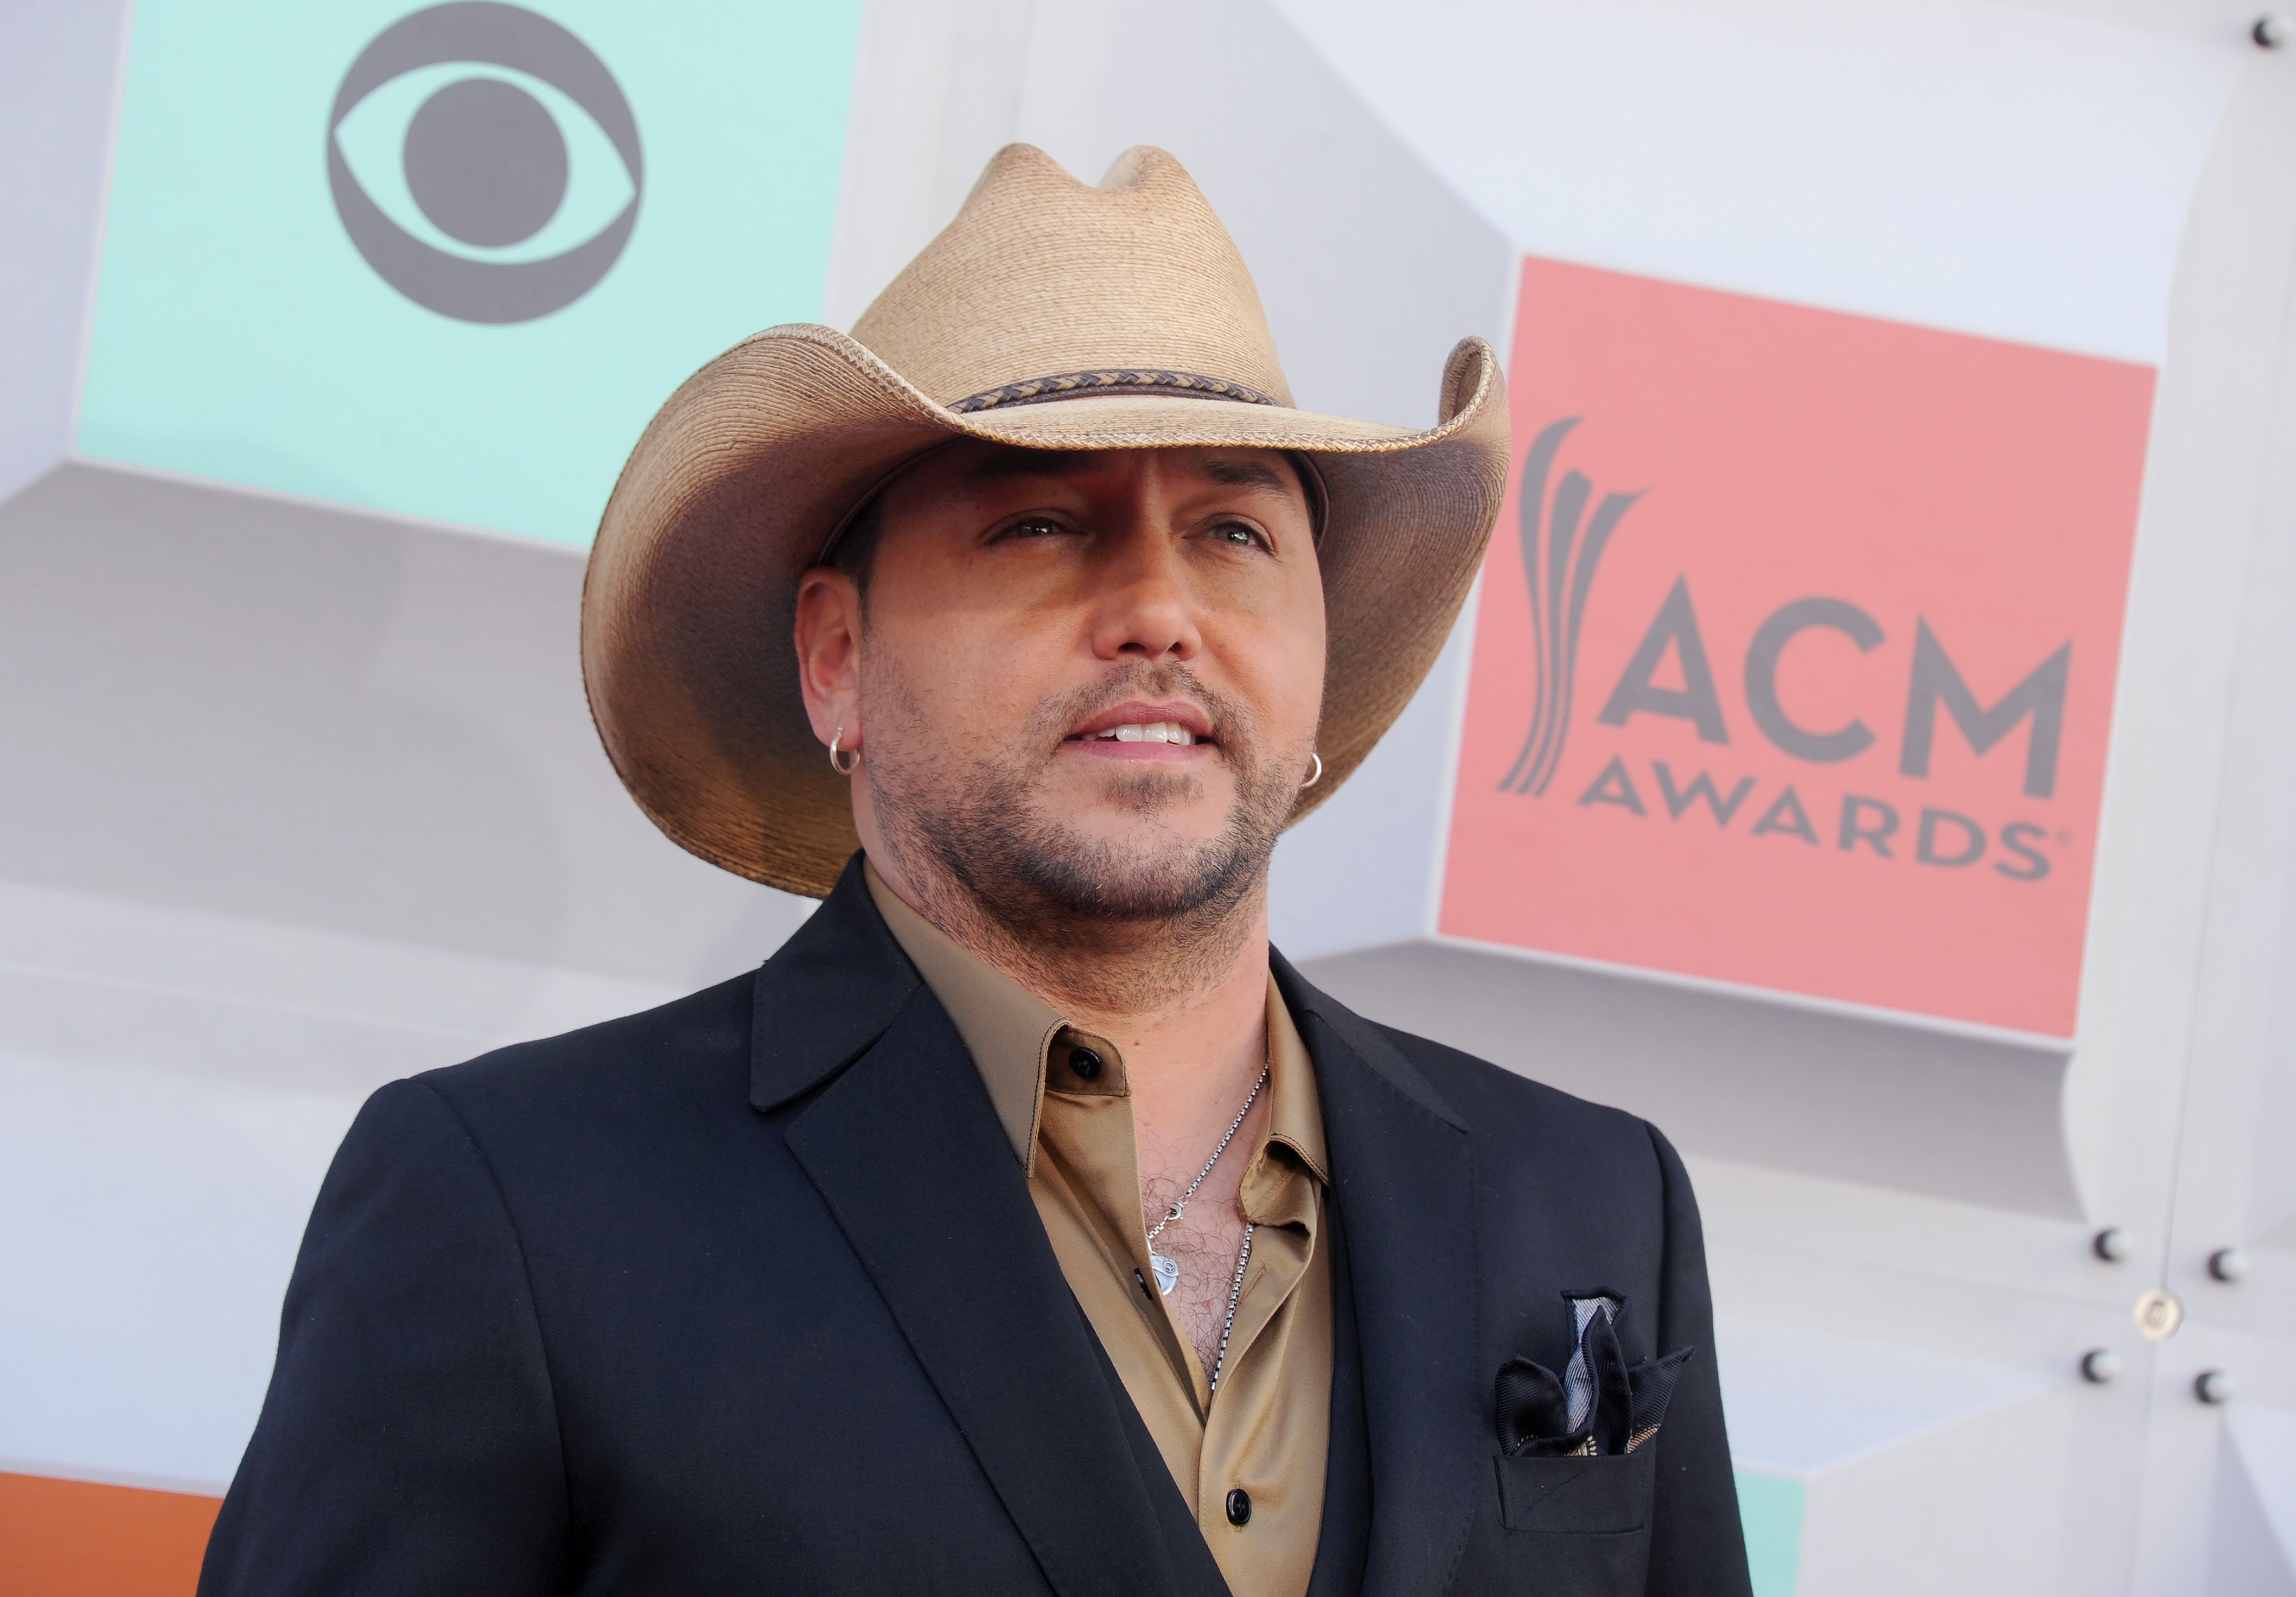 Musician Jason Aldean arrives at the 51st Academy Of Country Music Awards at MGM Grand Garden Arena on April 3, 2016 | Photo: Getty Images